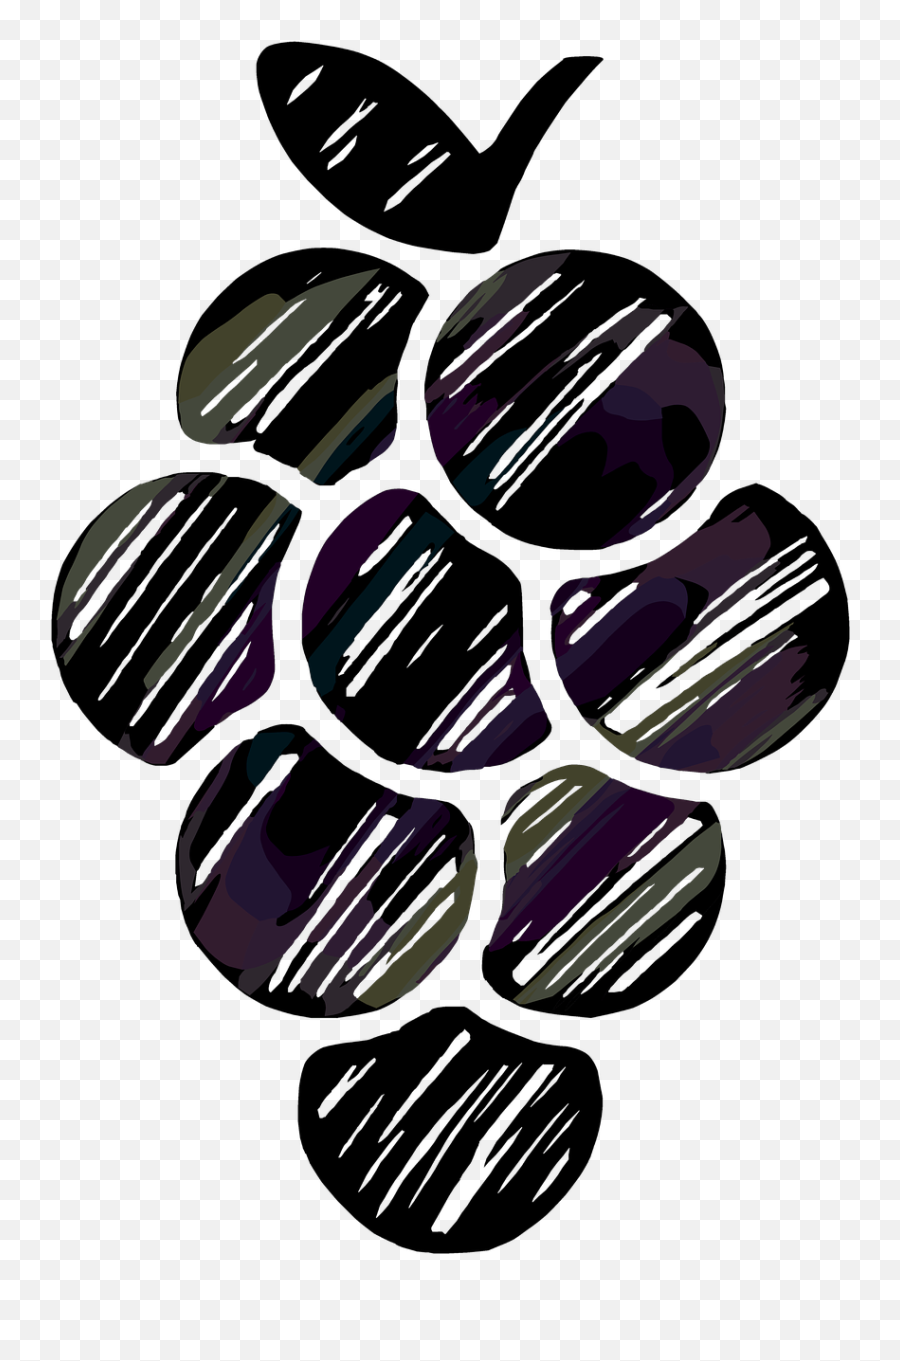 Download Free Photo Of Fruitvectorblackicongrape - From Grape Png,Fruit Icon Vector